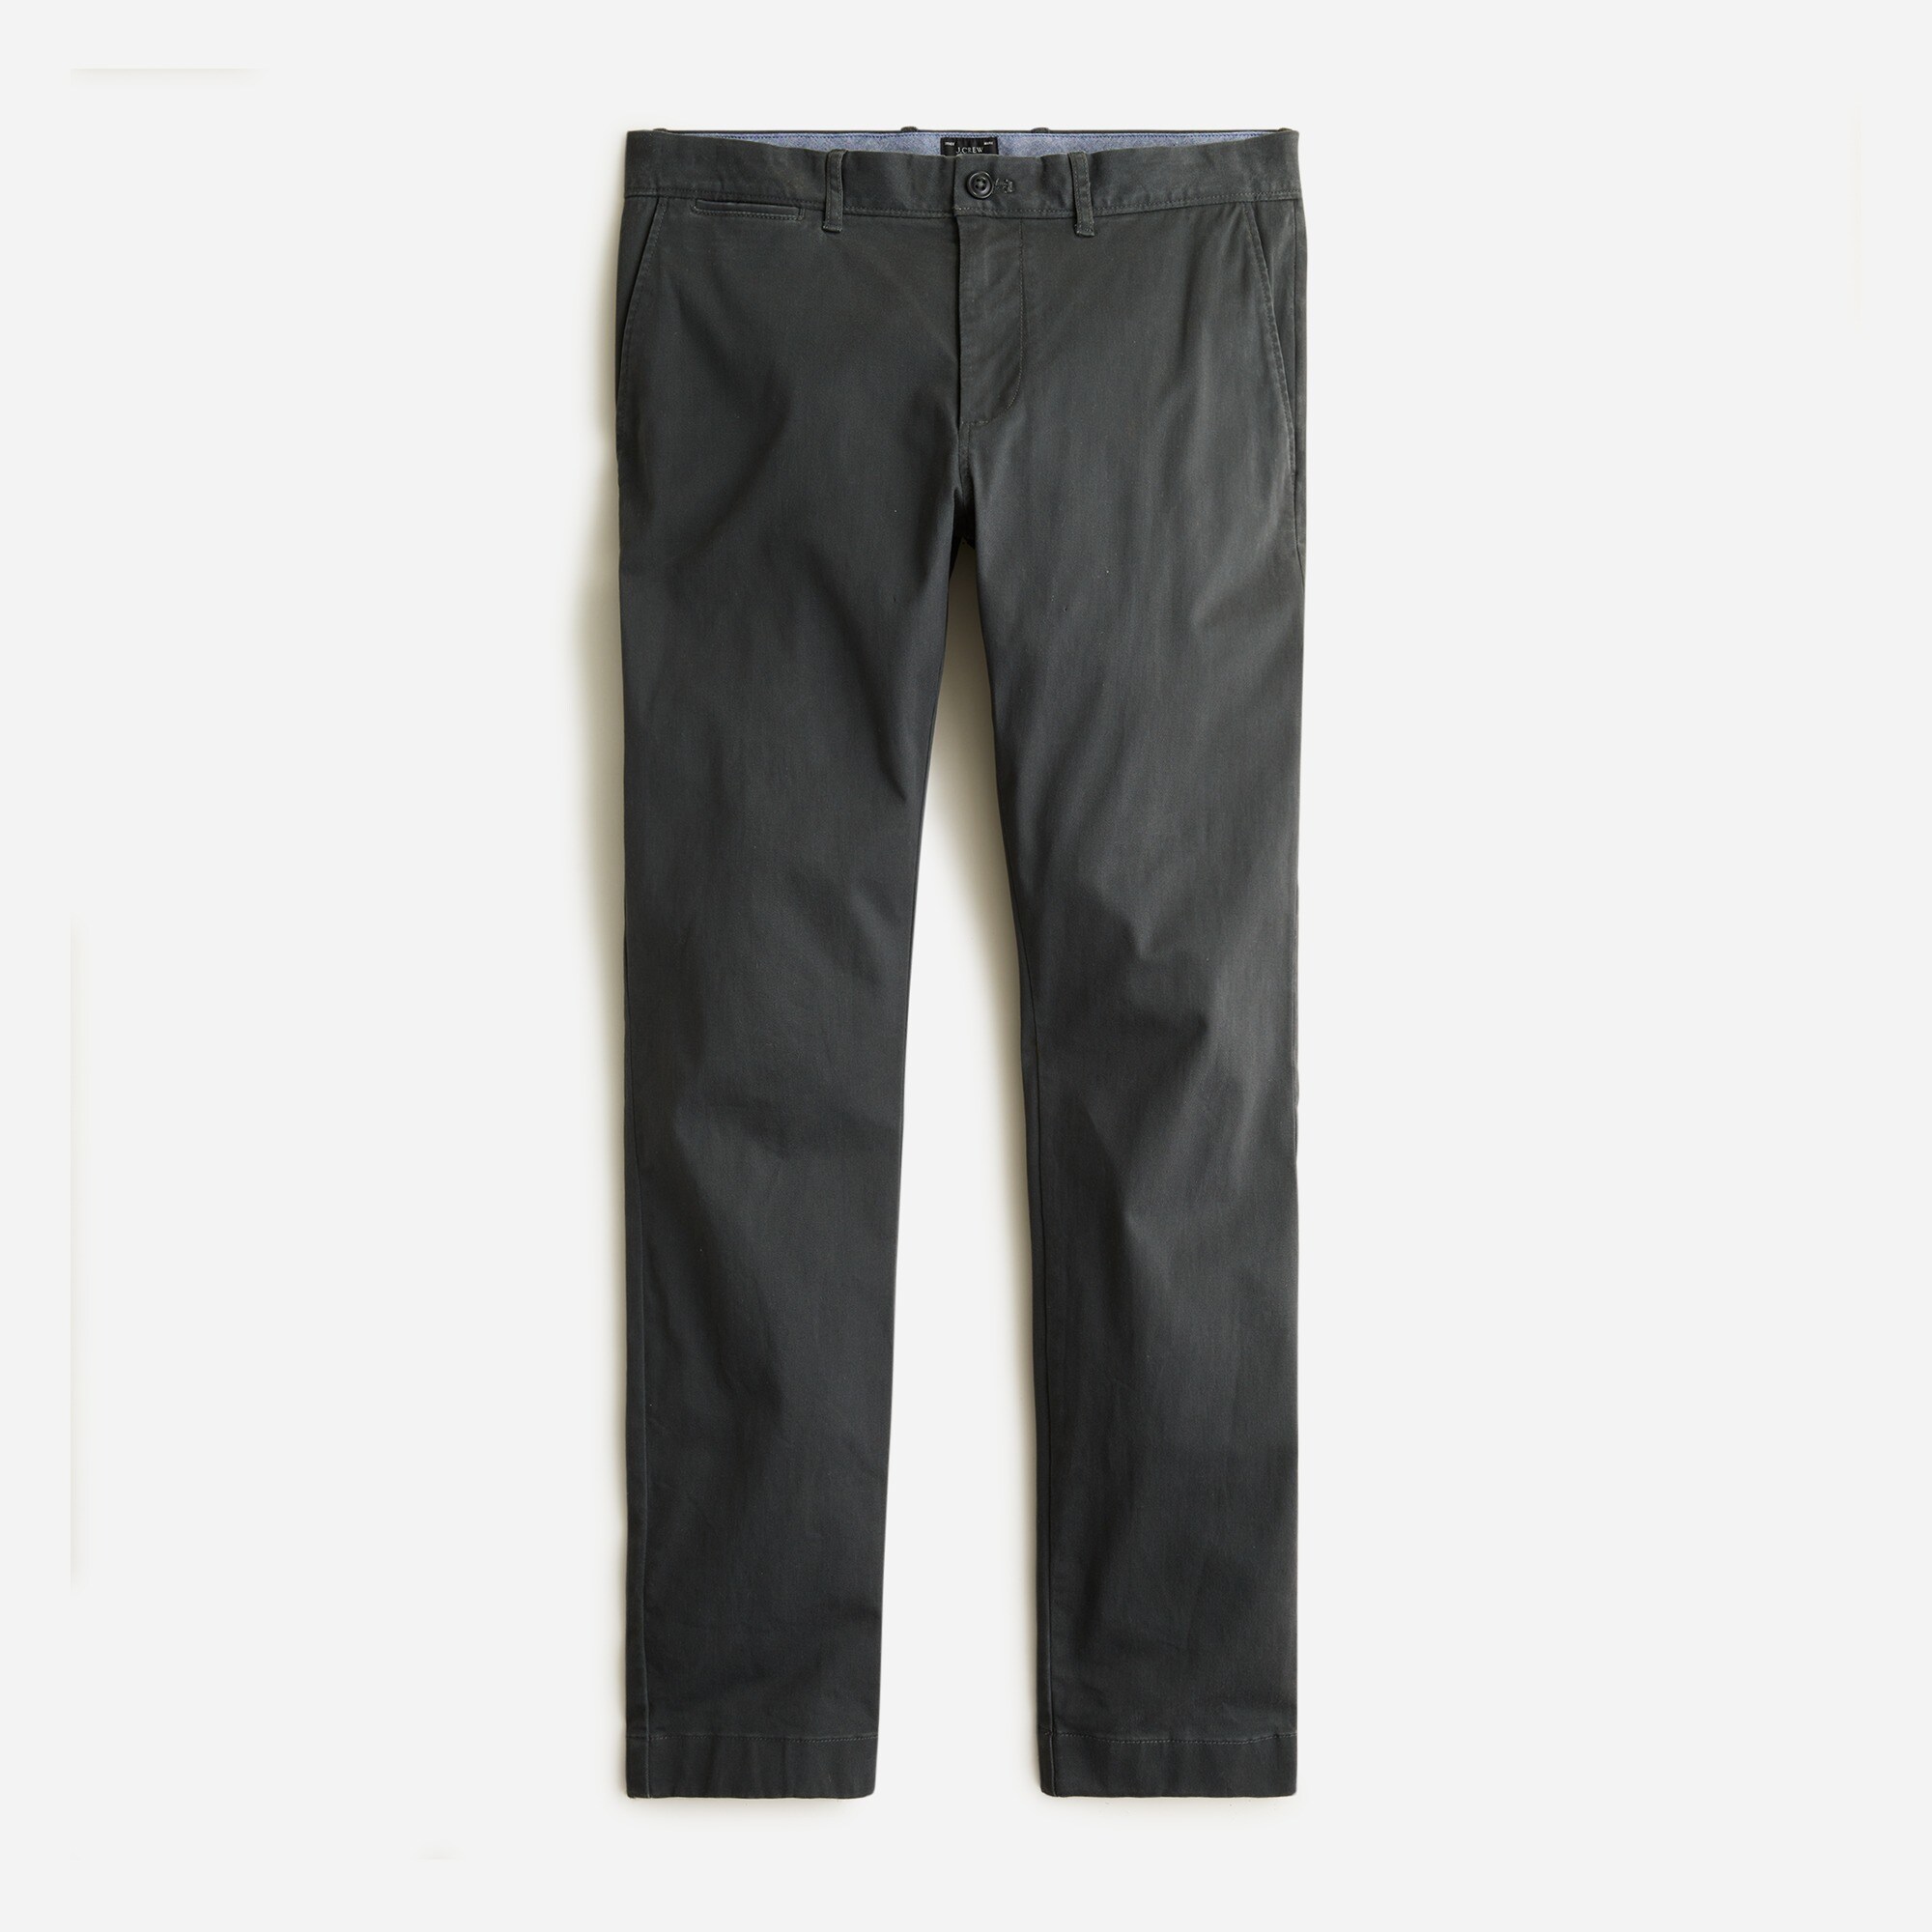  250 skinny-fit pant in stretch chino